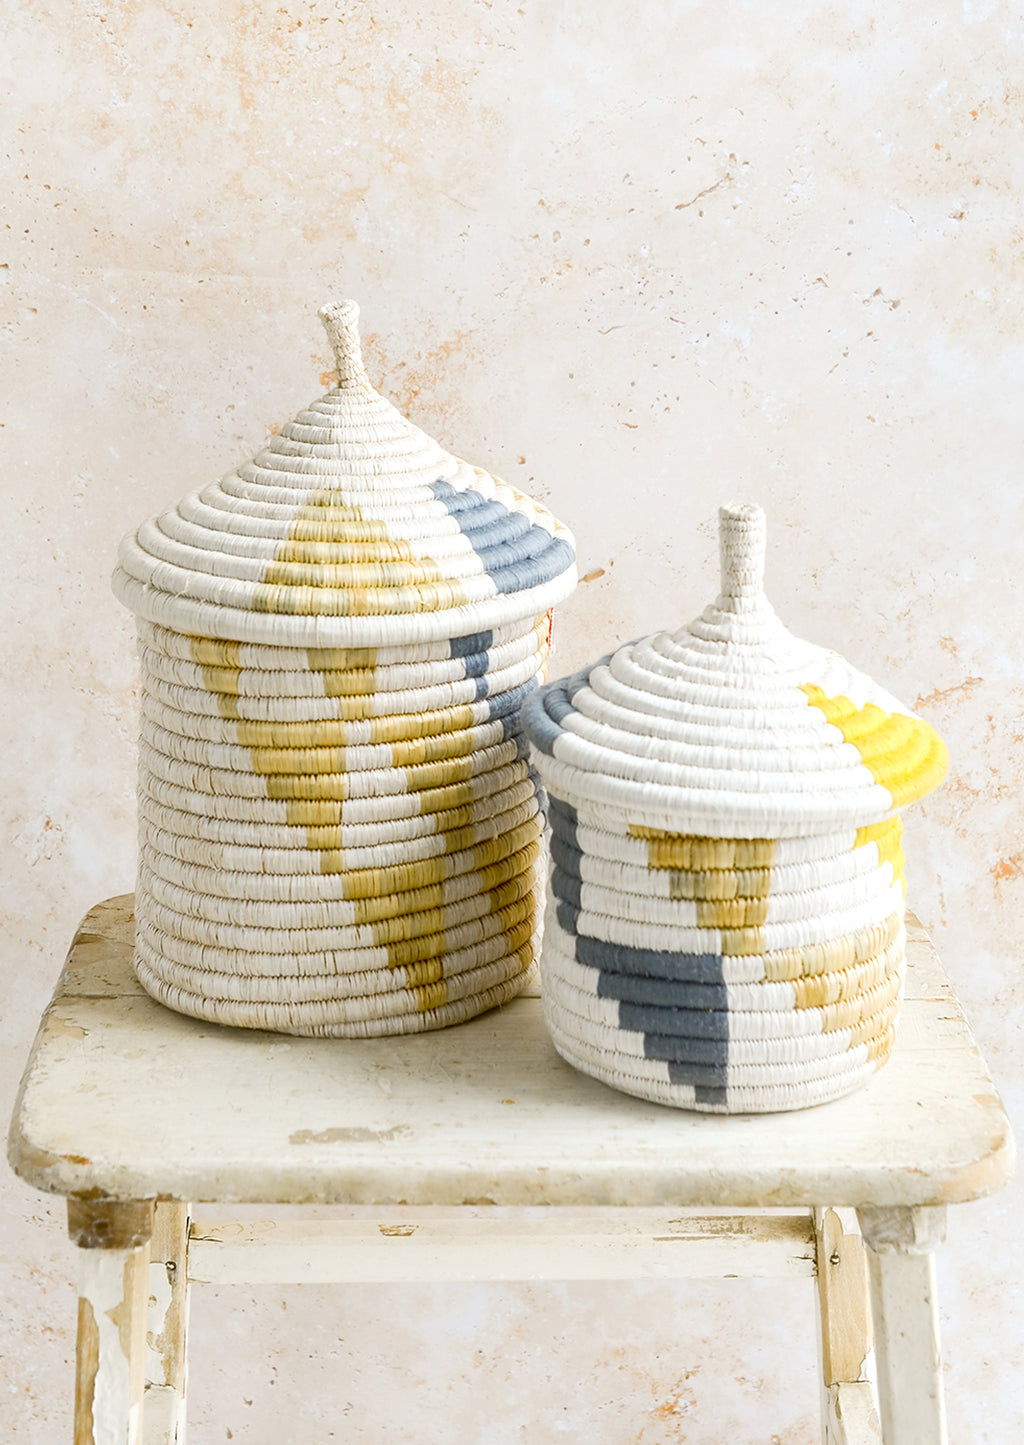 4: Woven lidded storage baskets with geometric patterns in small and medium sizes.